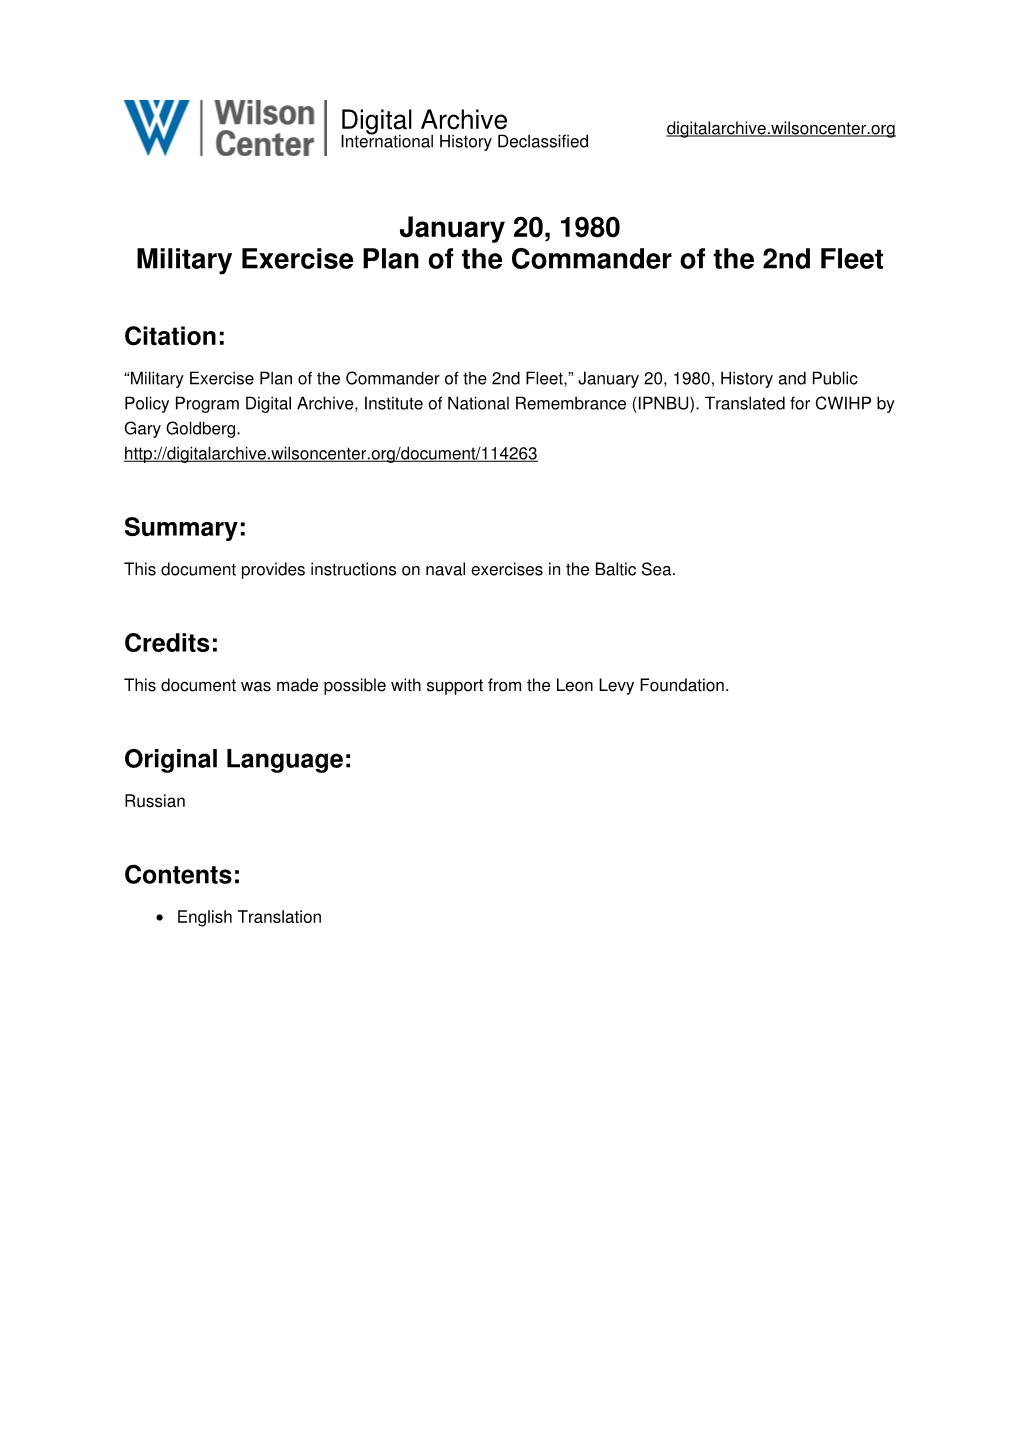 January 20, 1980 Military Exercise Plan of the Commander of the 2Nd Fleet